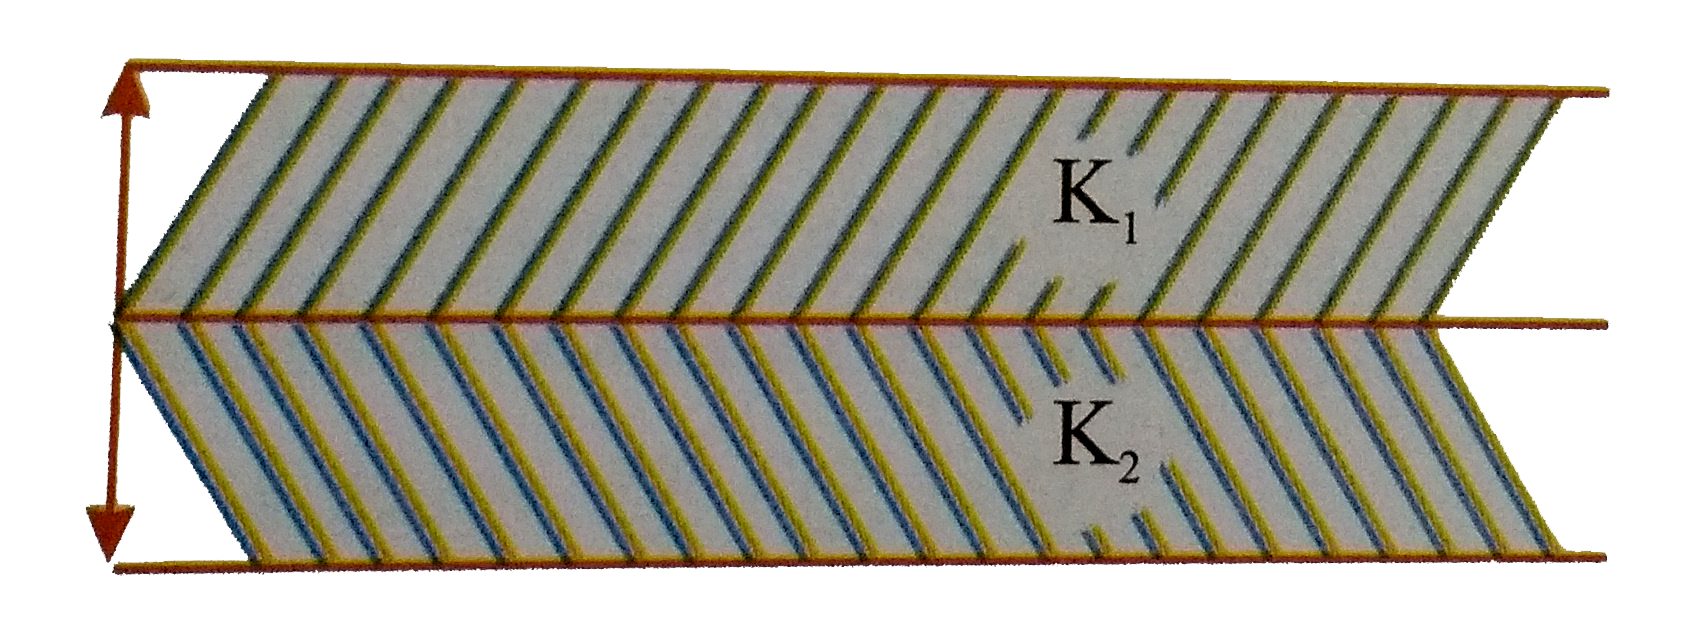 A parallel plate capacitor is made of two dielectric blocks in series. One of the blocks has thickness d(1) and dielectric constant K(1) and the other has thickness d(2) and dielectric constant K(2) as shown in figure. This arrangement can be through as a dielectric slab of thickness d (= d(1) + d(2)) and effective dielectric constant K. The K is.   .